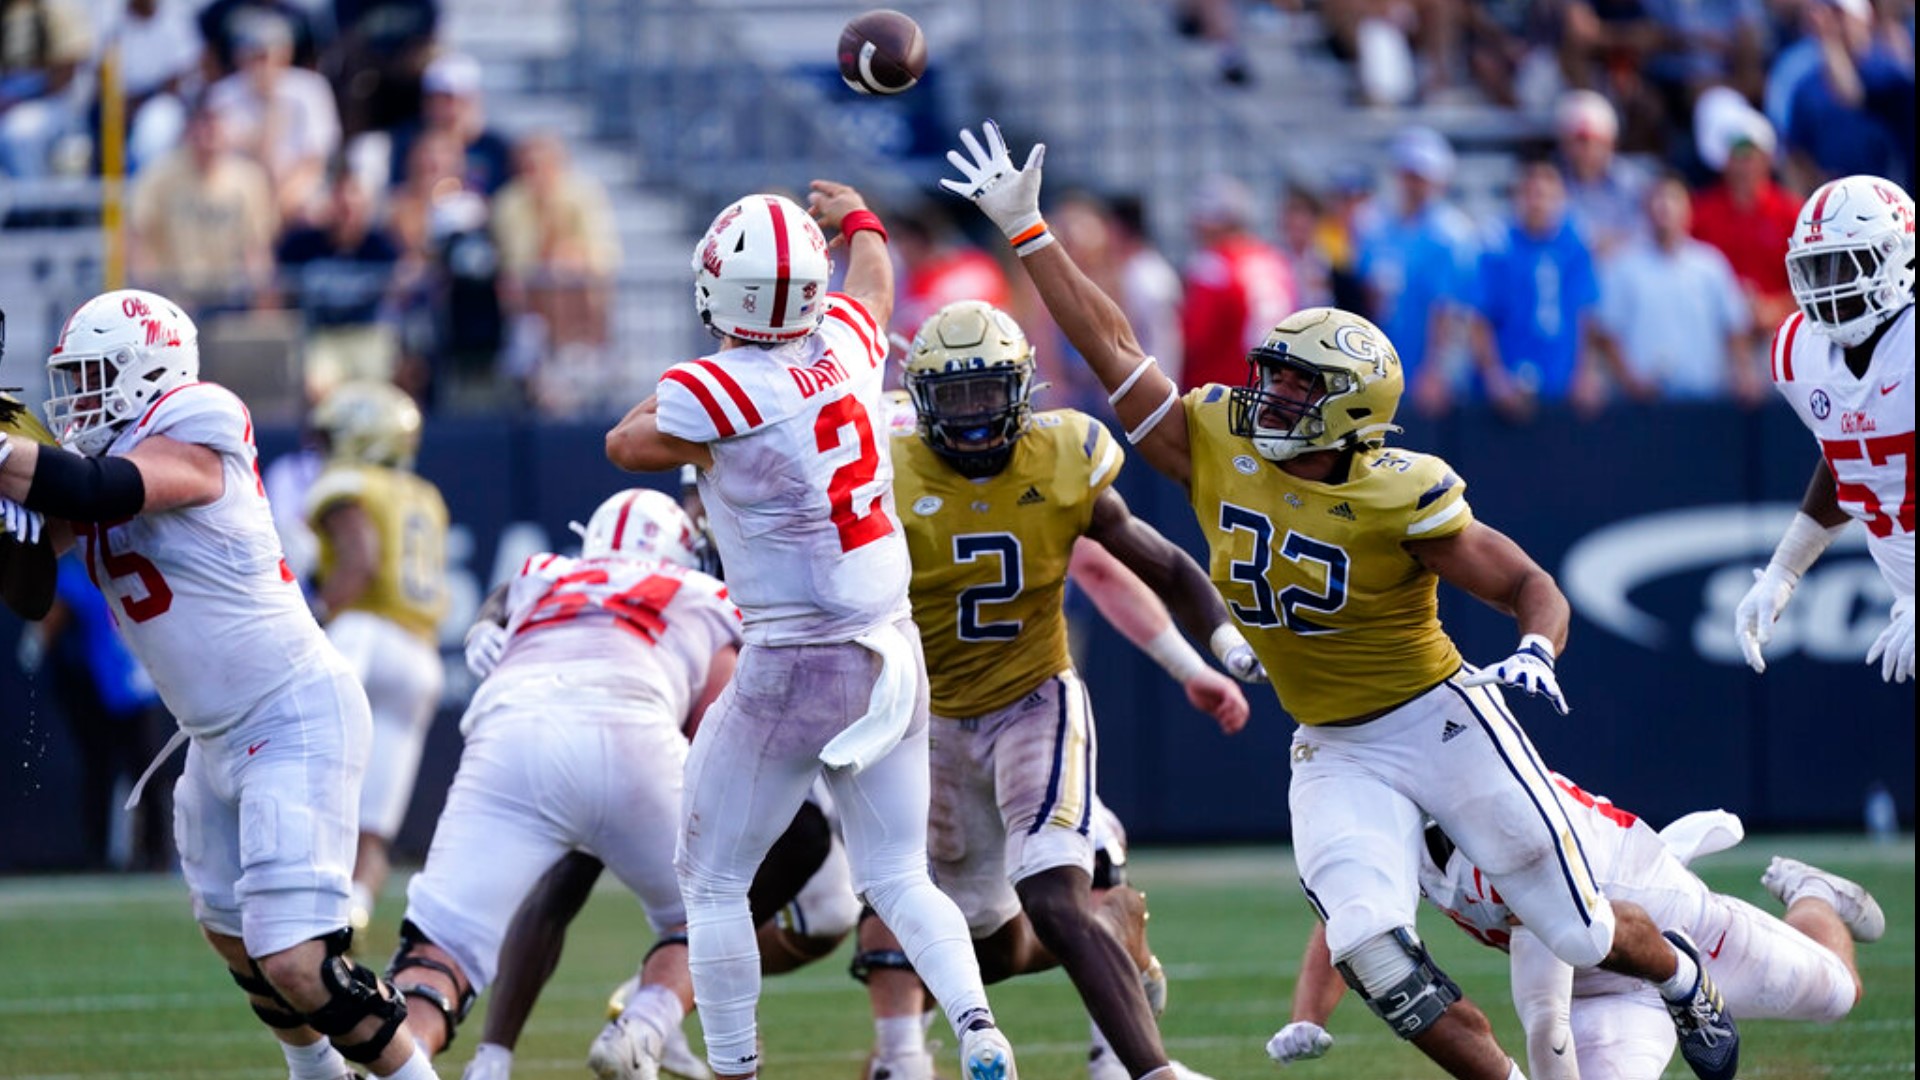 Georgia Tech's football team is looking for answers after Ole Miss came to Atlanta and dominated the Yellow Jackets.